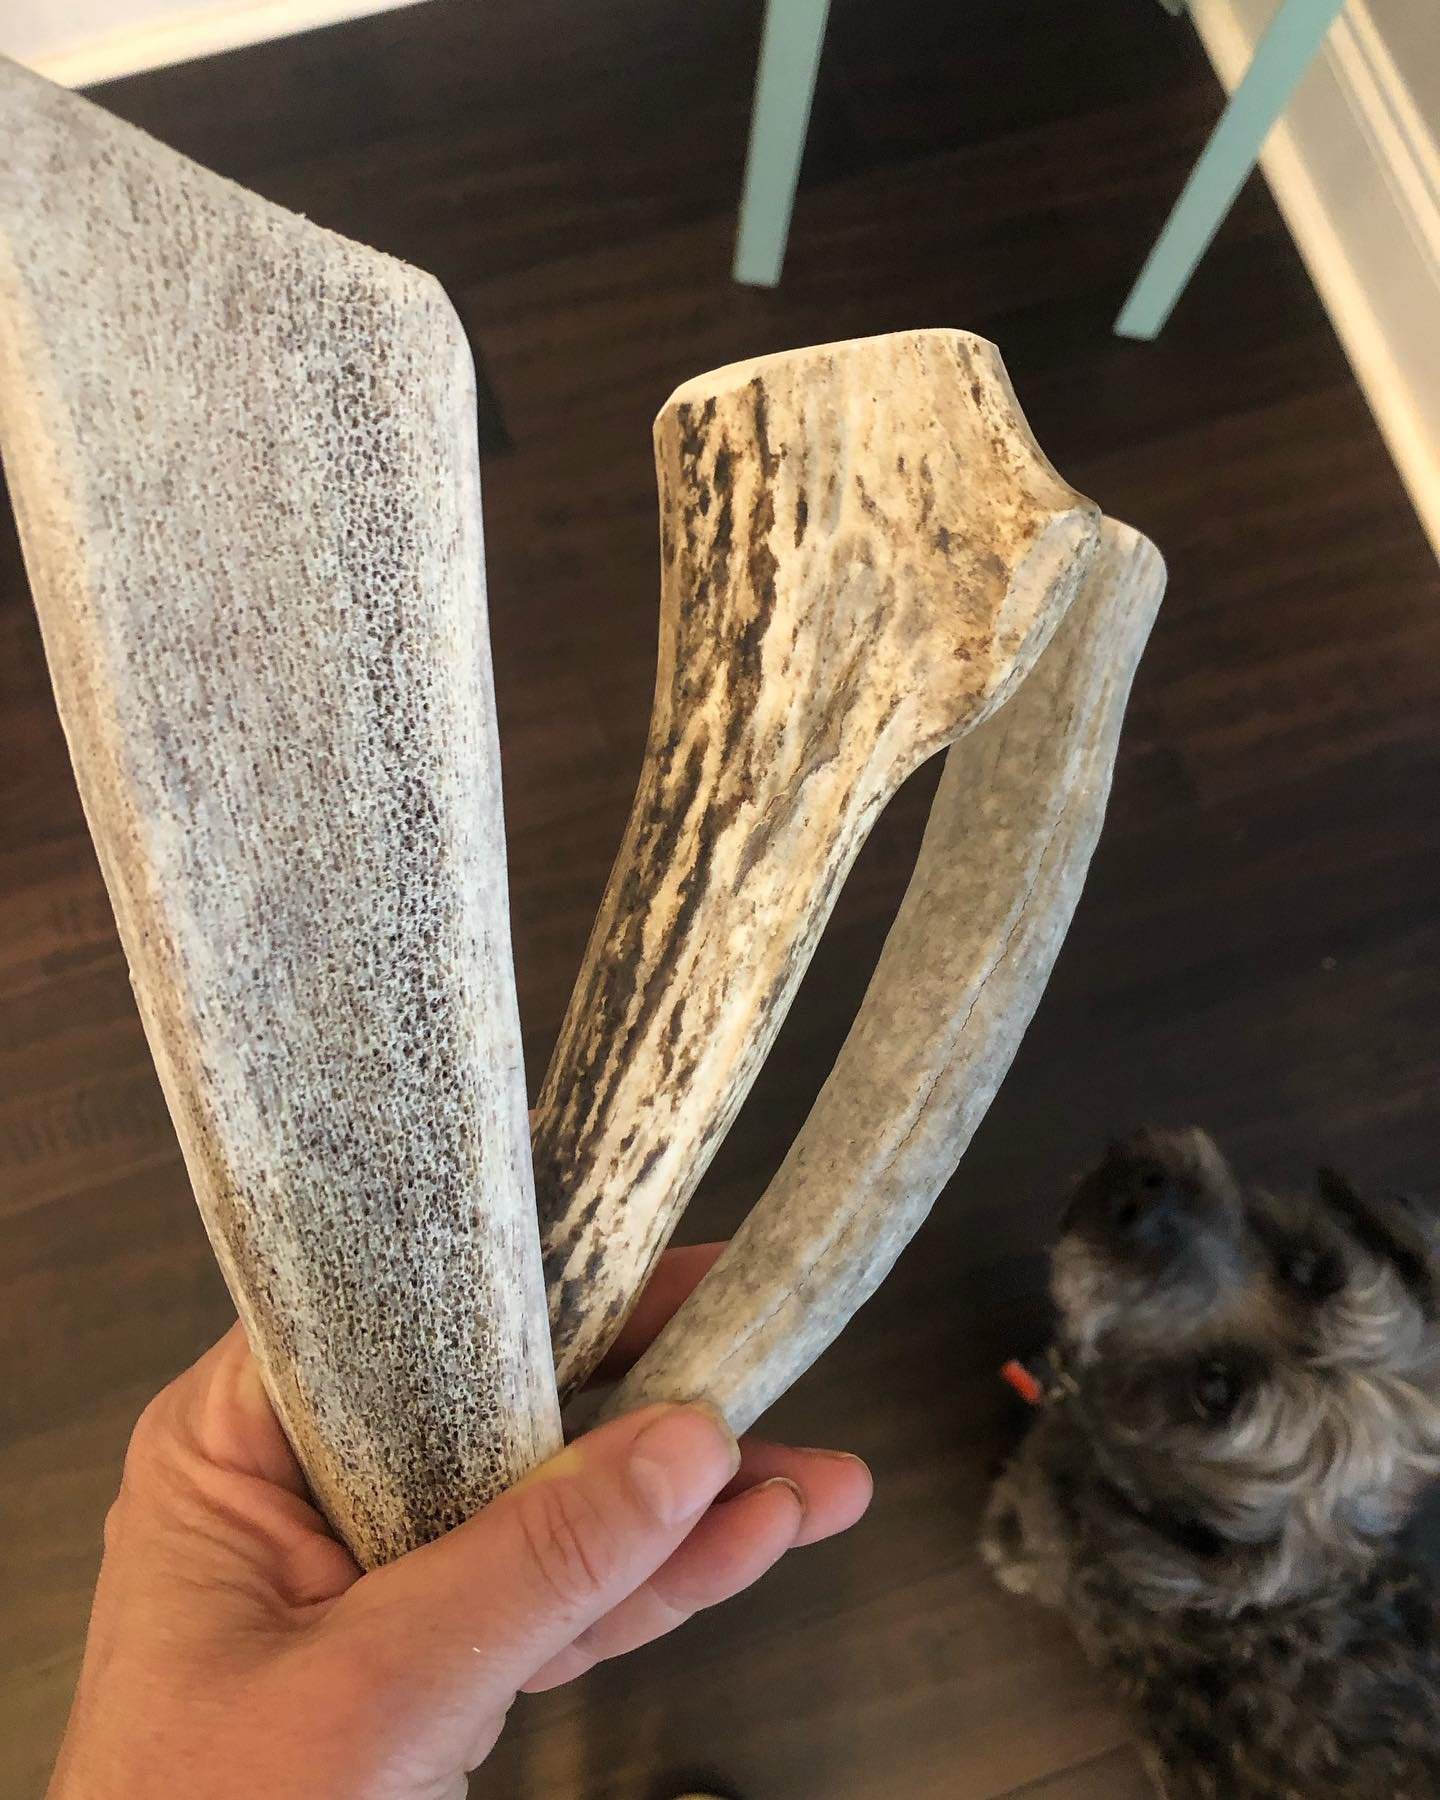 RESTOCK ALERT: Naturally Shed Elk Antlers. Cooper approved. Elk Antlers are perfect for power chews and anxious chewers. My Teddy gnaws on his split antler and loves the marrow. Get yours from our web store, @belmontnc_farmersmarket @denver_nc_farmer